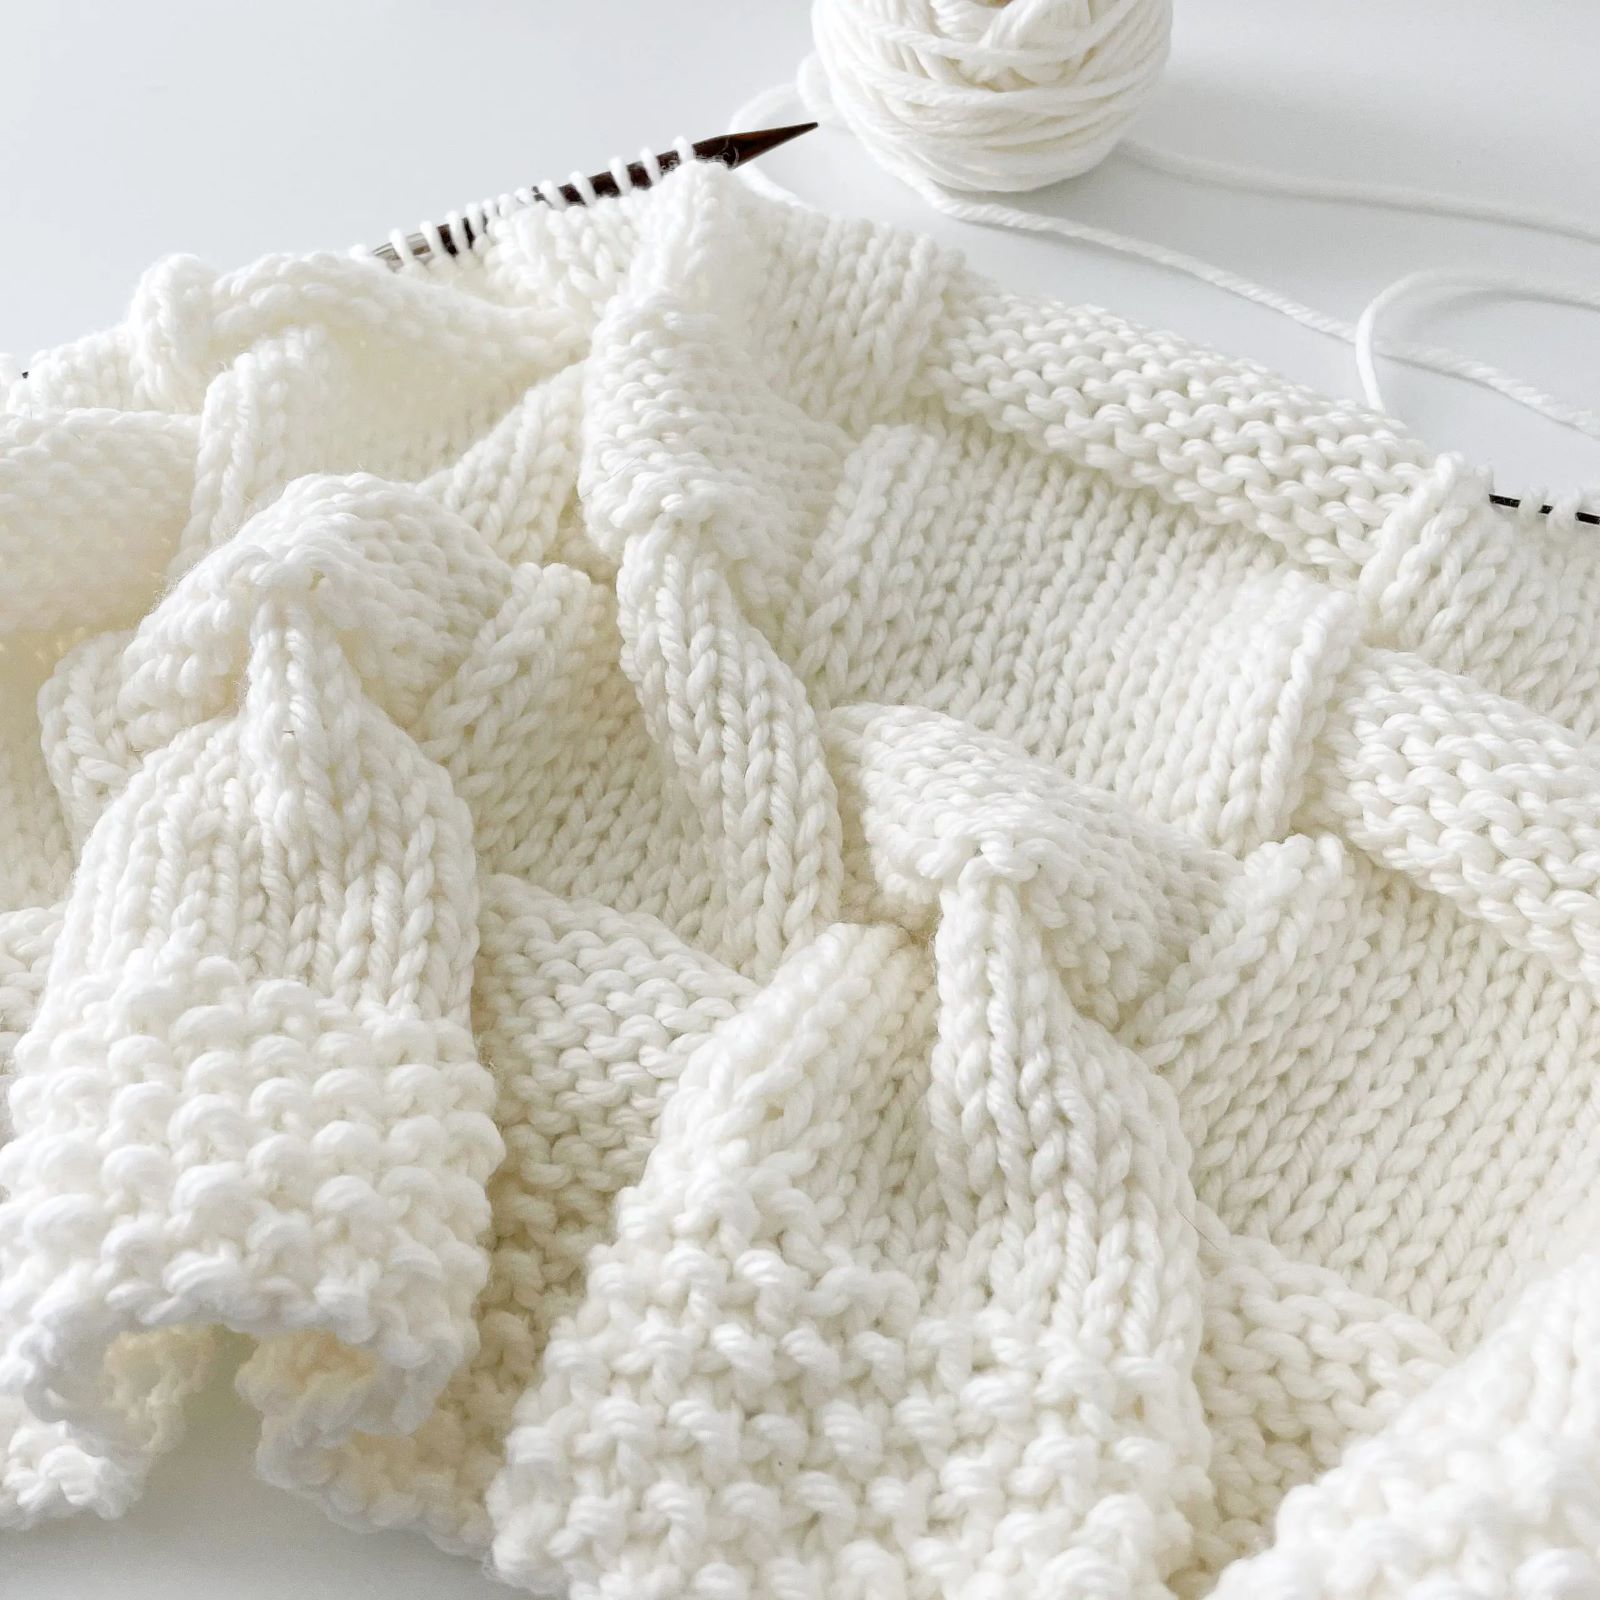 How To Knit A Baby Blanket